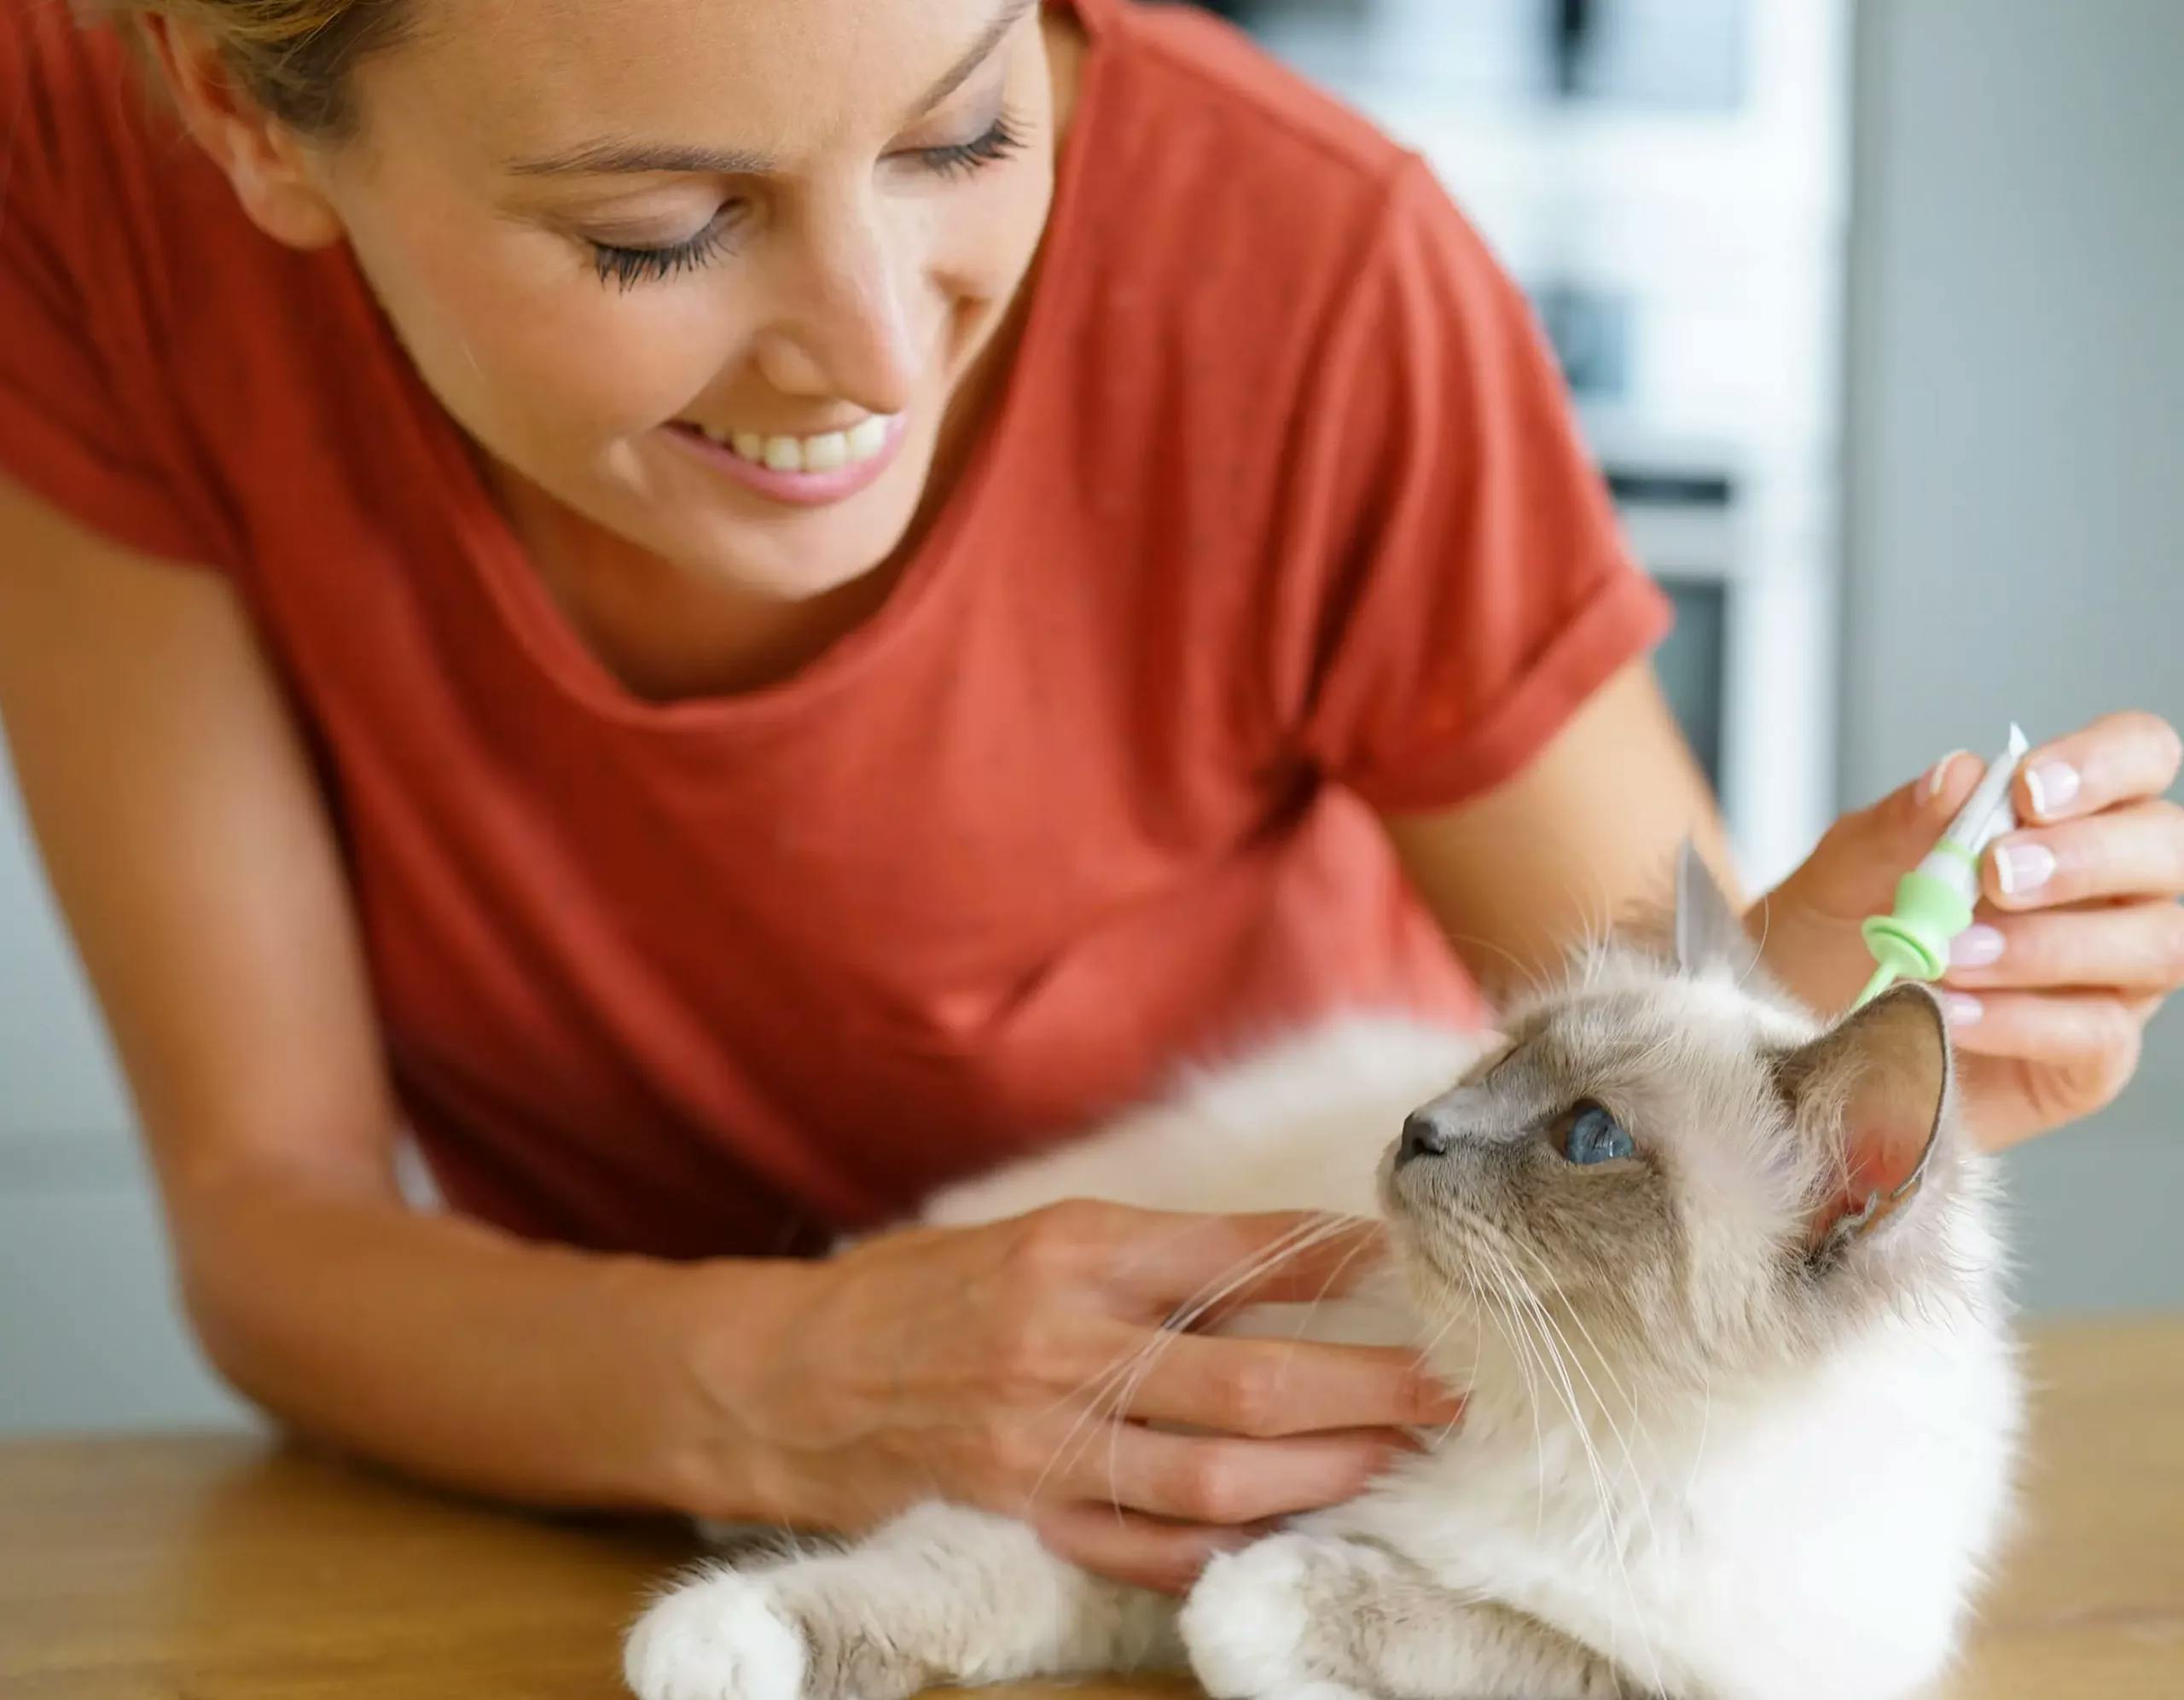 Woman cleaning a cat's ear with a green brush